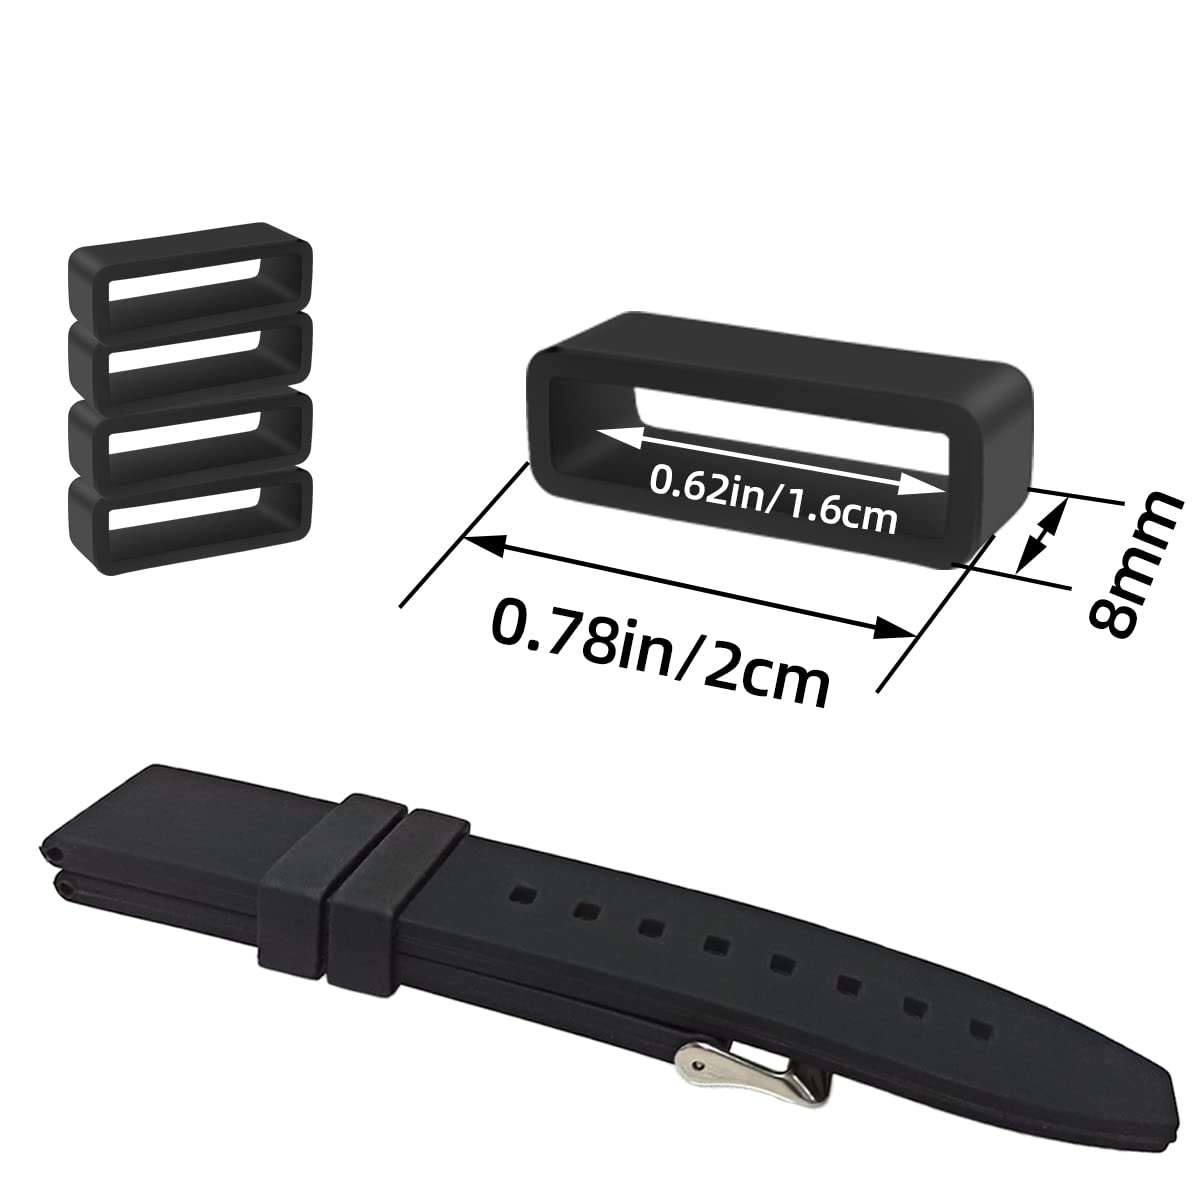 6 Pcs Watch Band Loop Holder Keeper for Resin Belt, Replacement Fastener Rings for Silicone Leather Rubber Watch Strap, Durable Fastener Retainer Size(16mm)